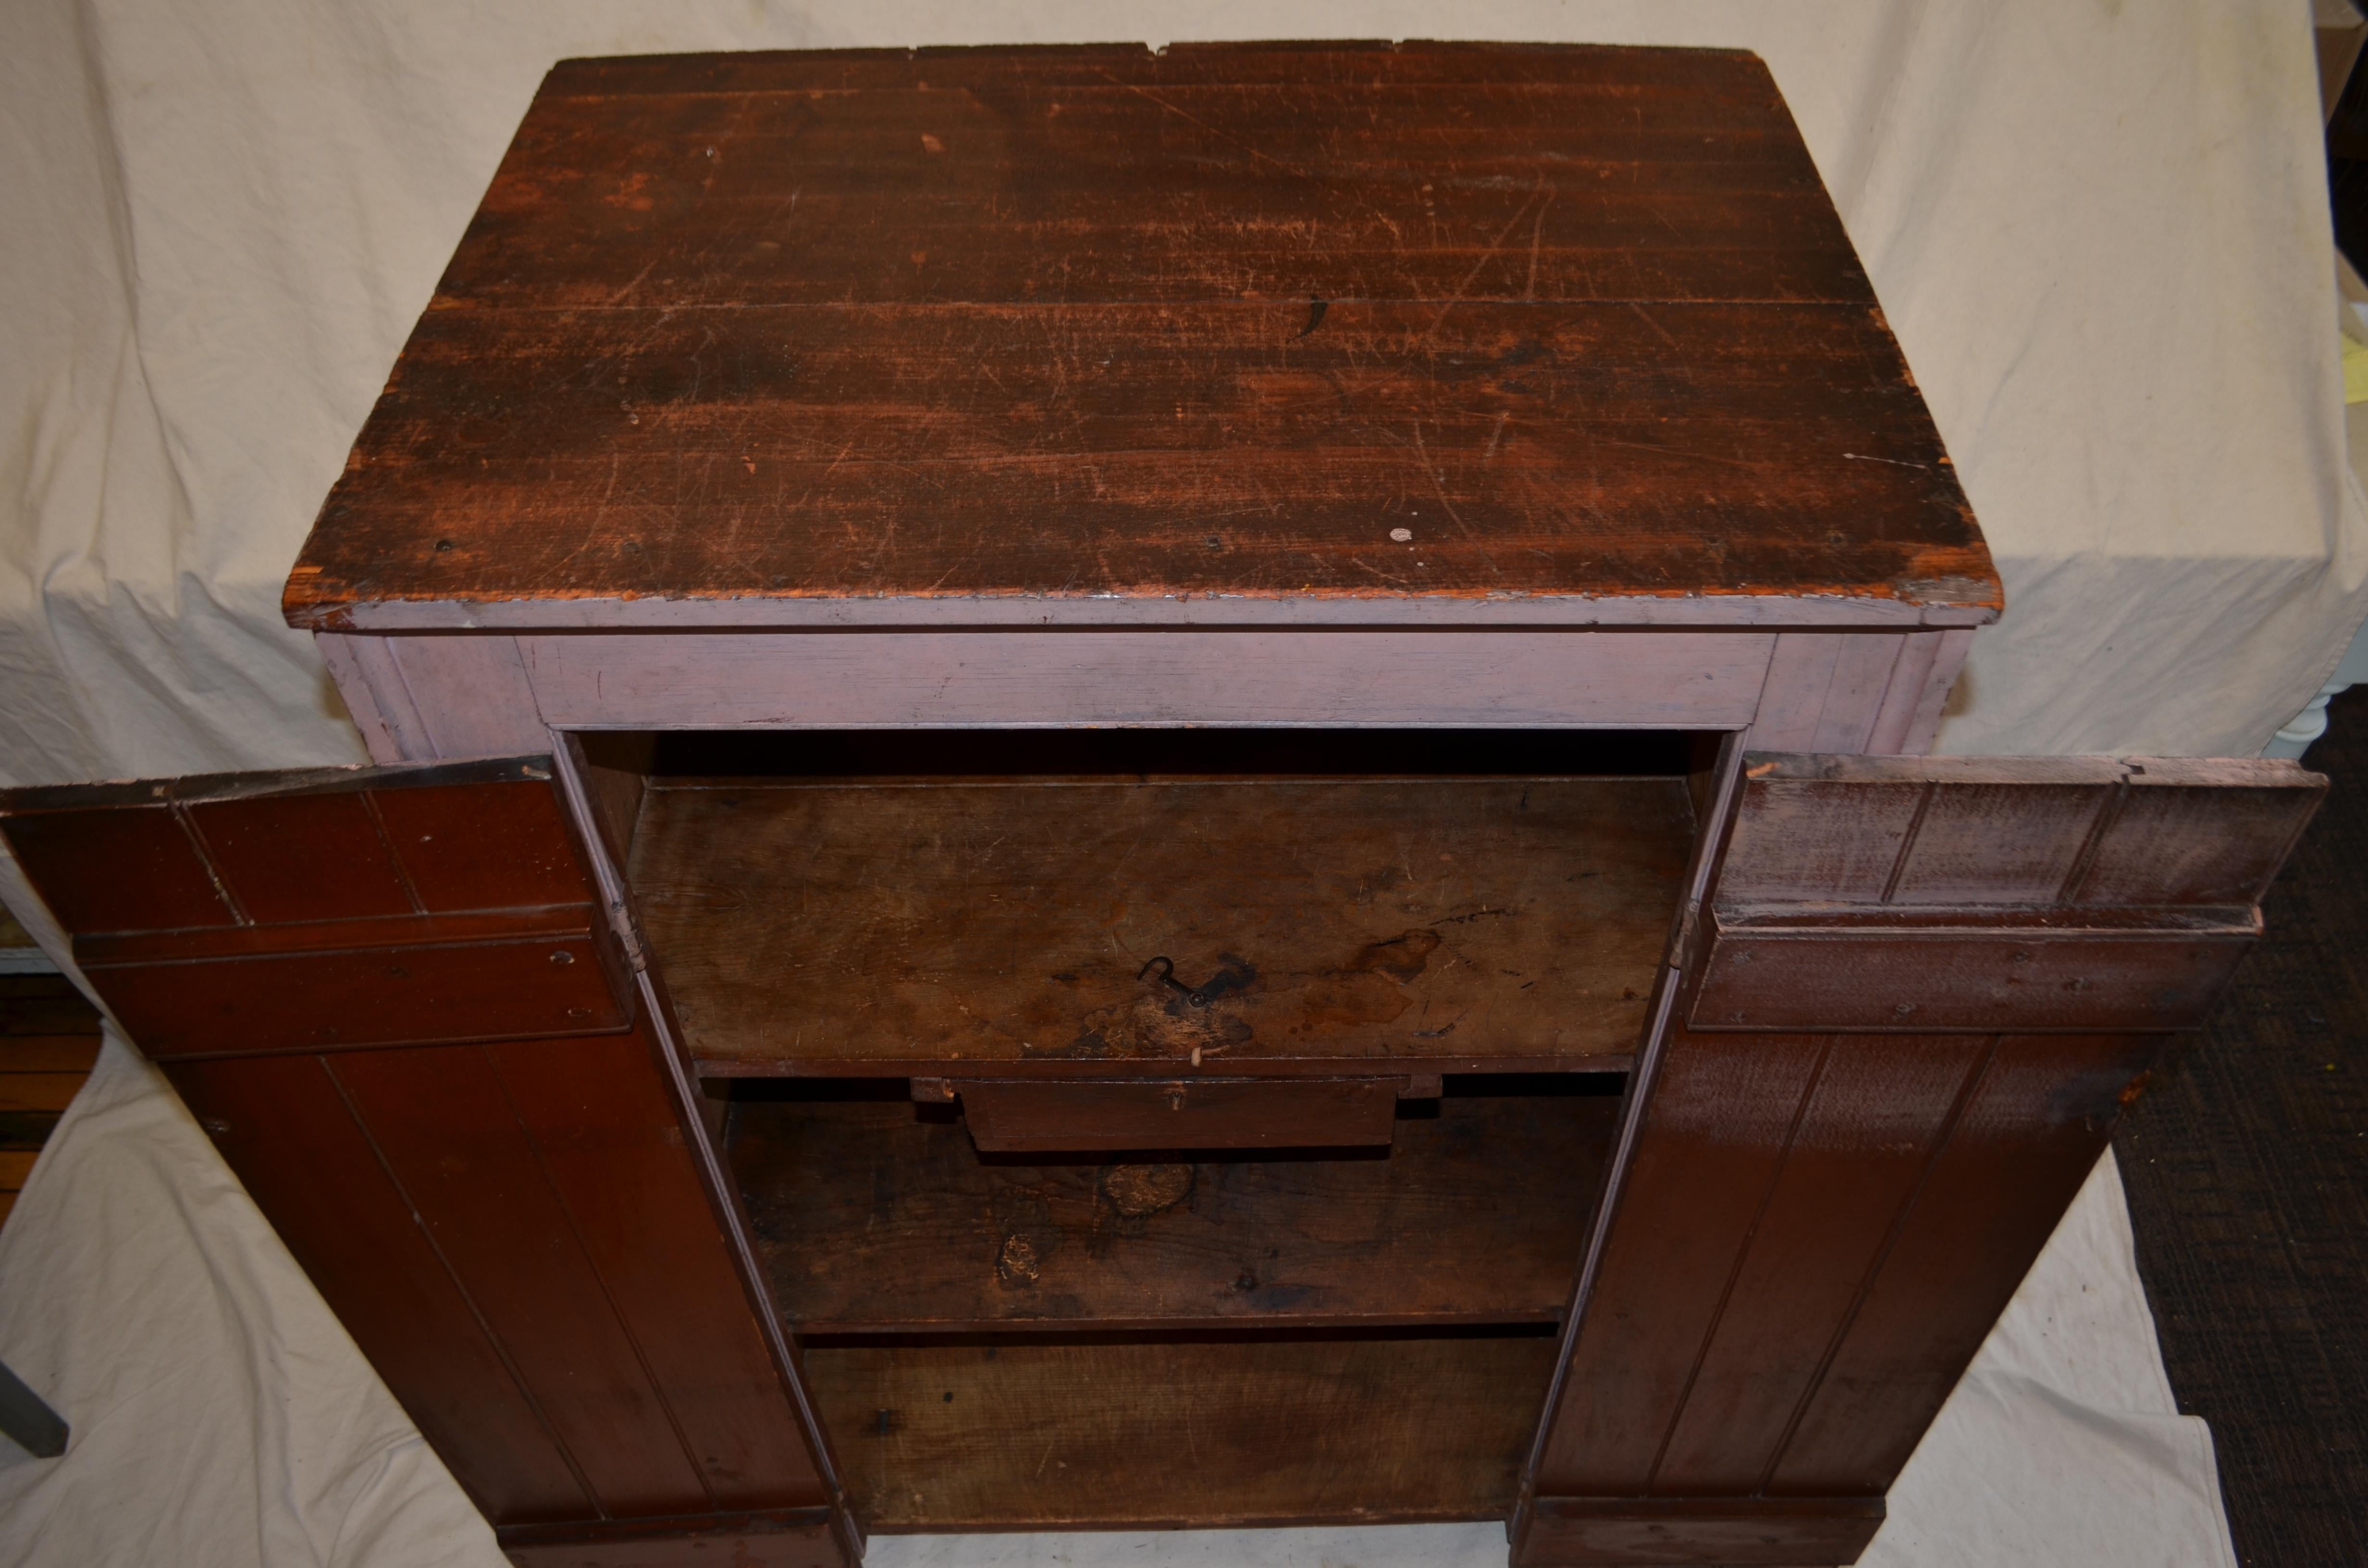 Early 1800s Cupboard for Parlor, Kitchen, Pantry with Lockbox Inside 11